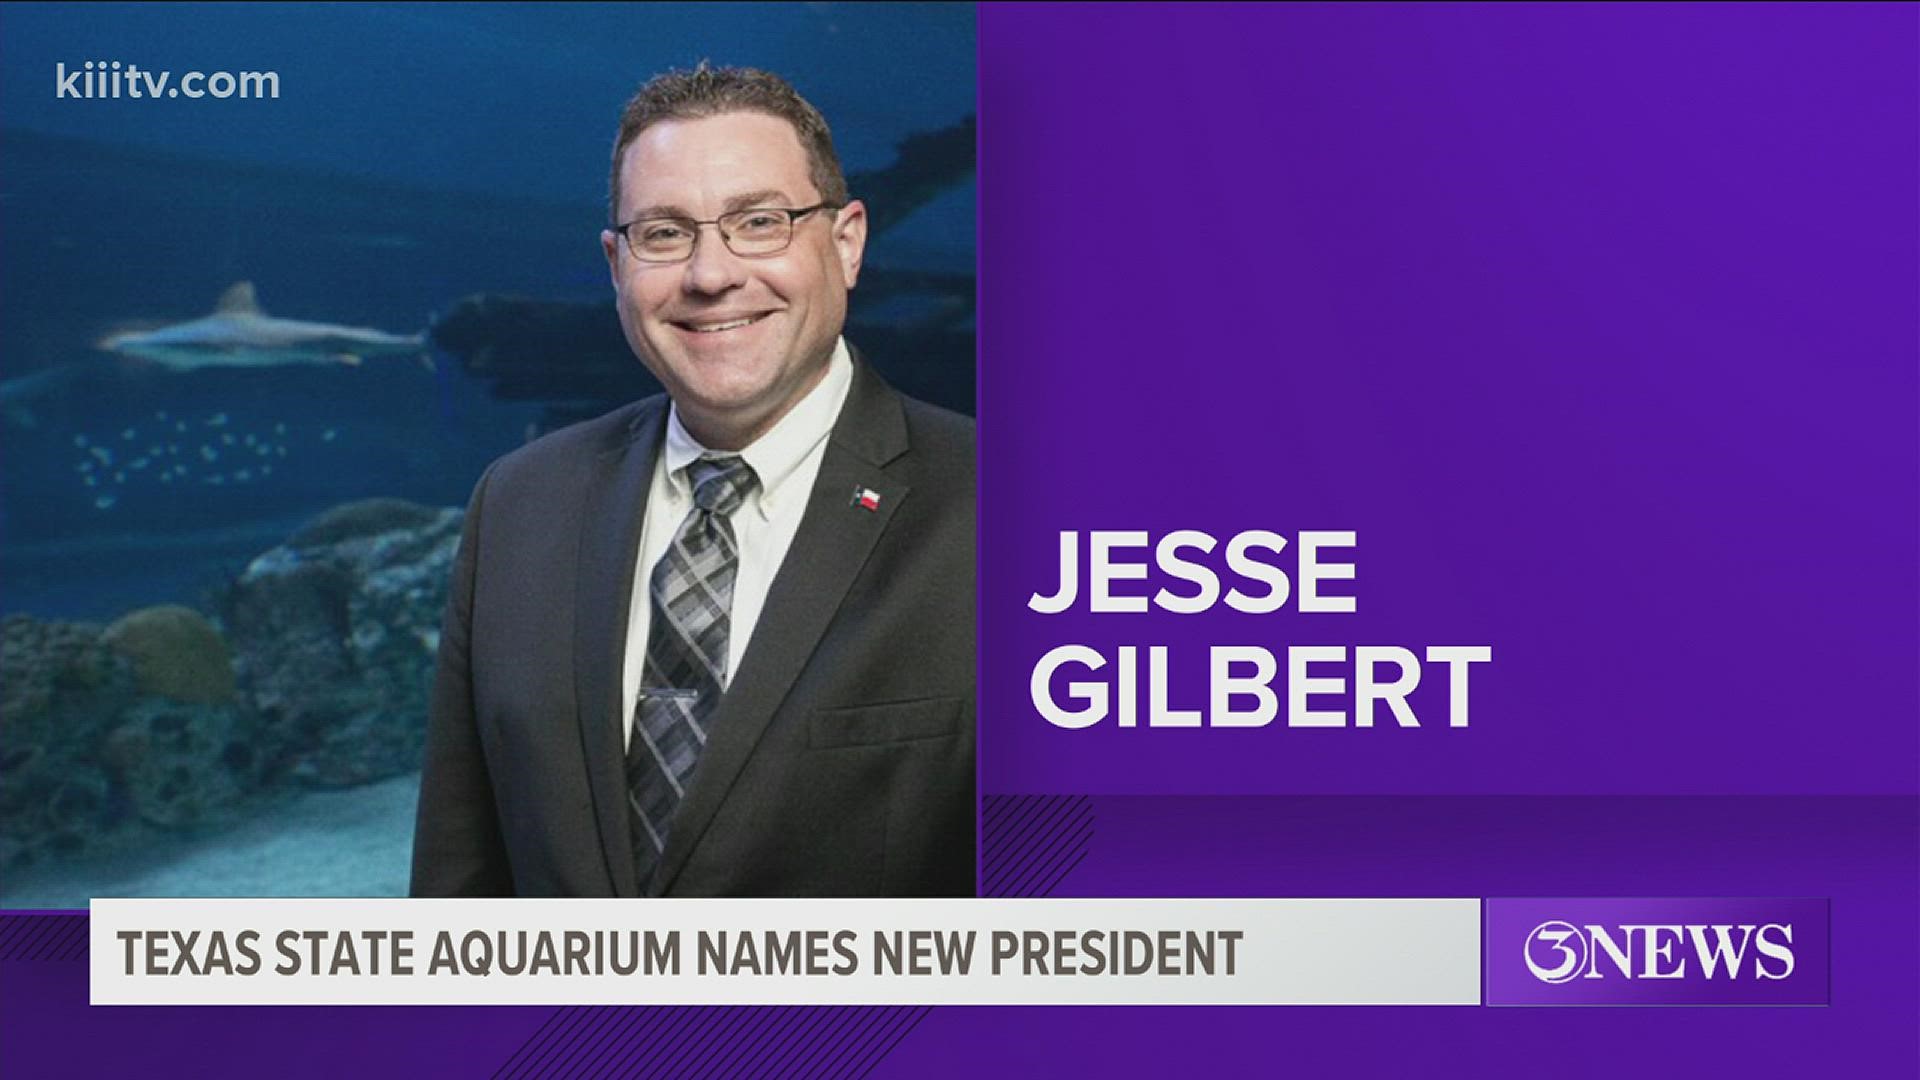 Jesse Gilbert was voted in unanimously by the Aquarium's executive committee as the new president and CEO following the departure of Tom Schmid.